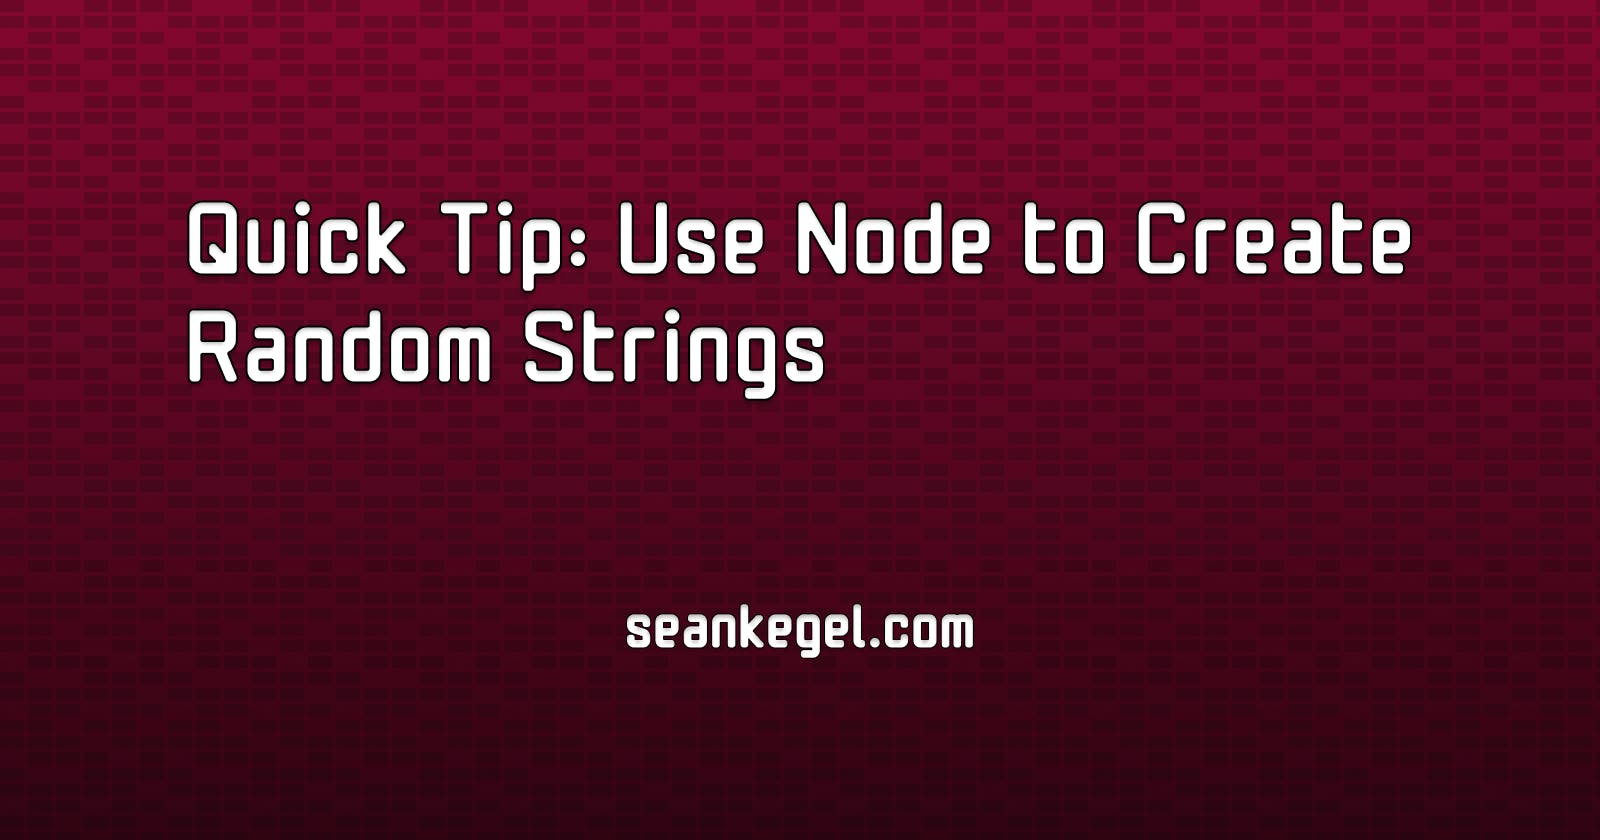 Quick Tip: Use Node to Create Random Strings